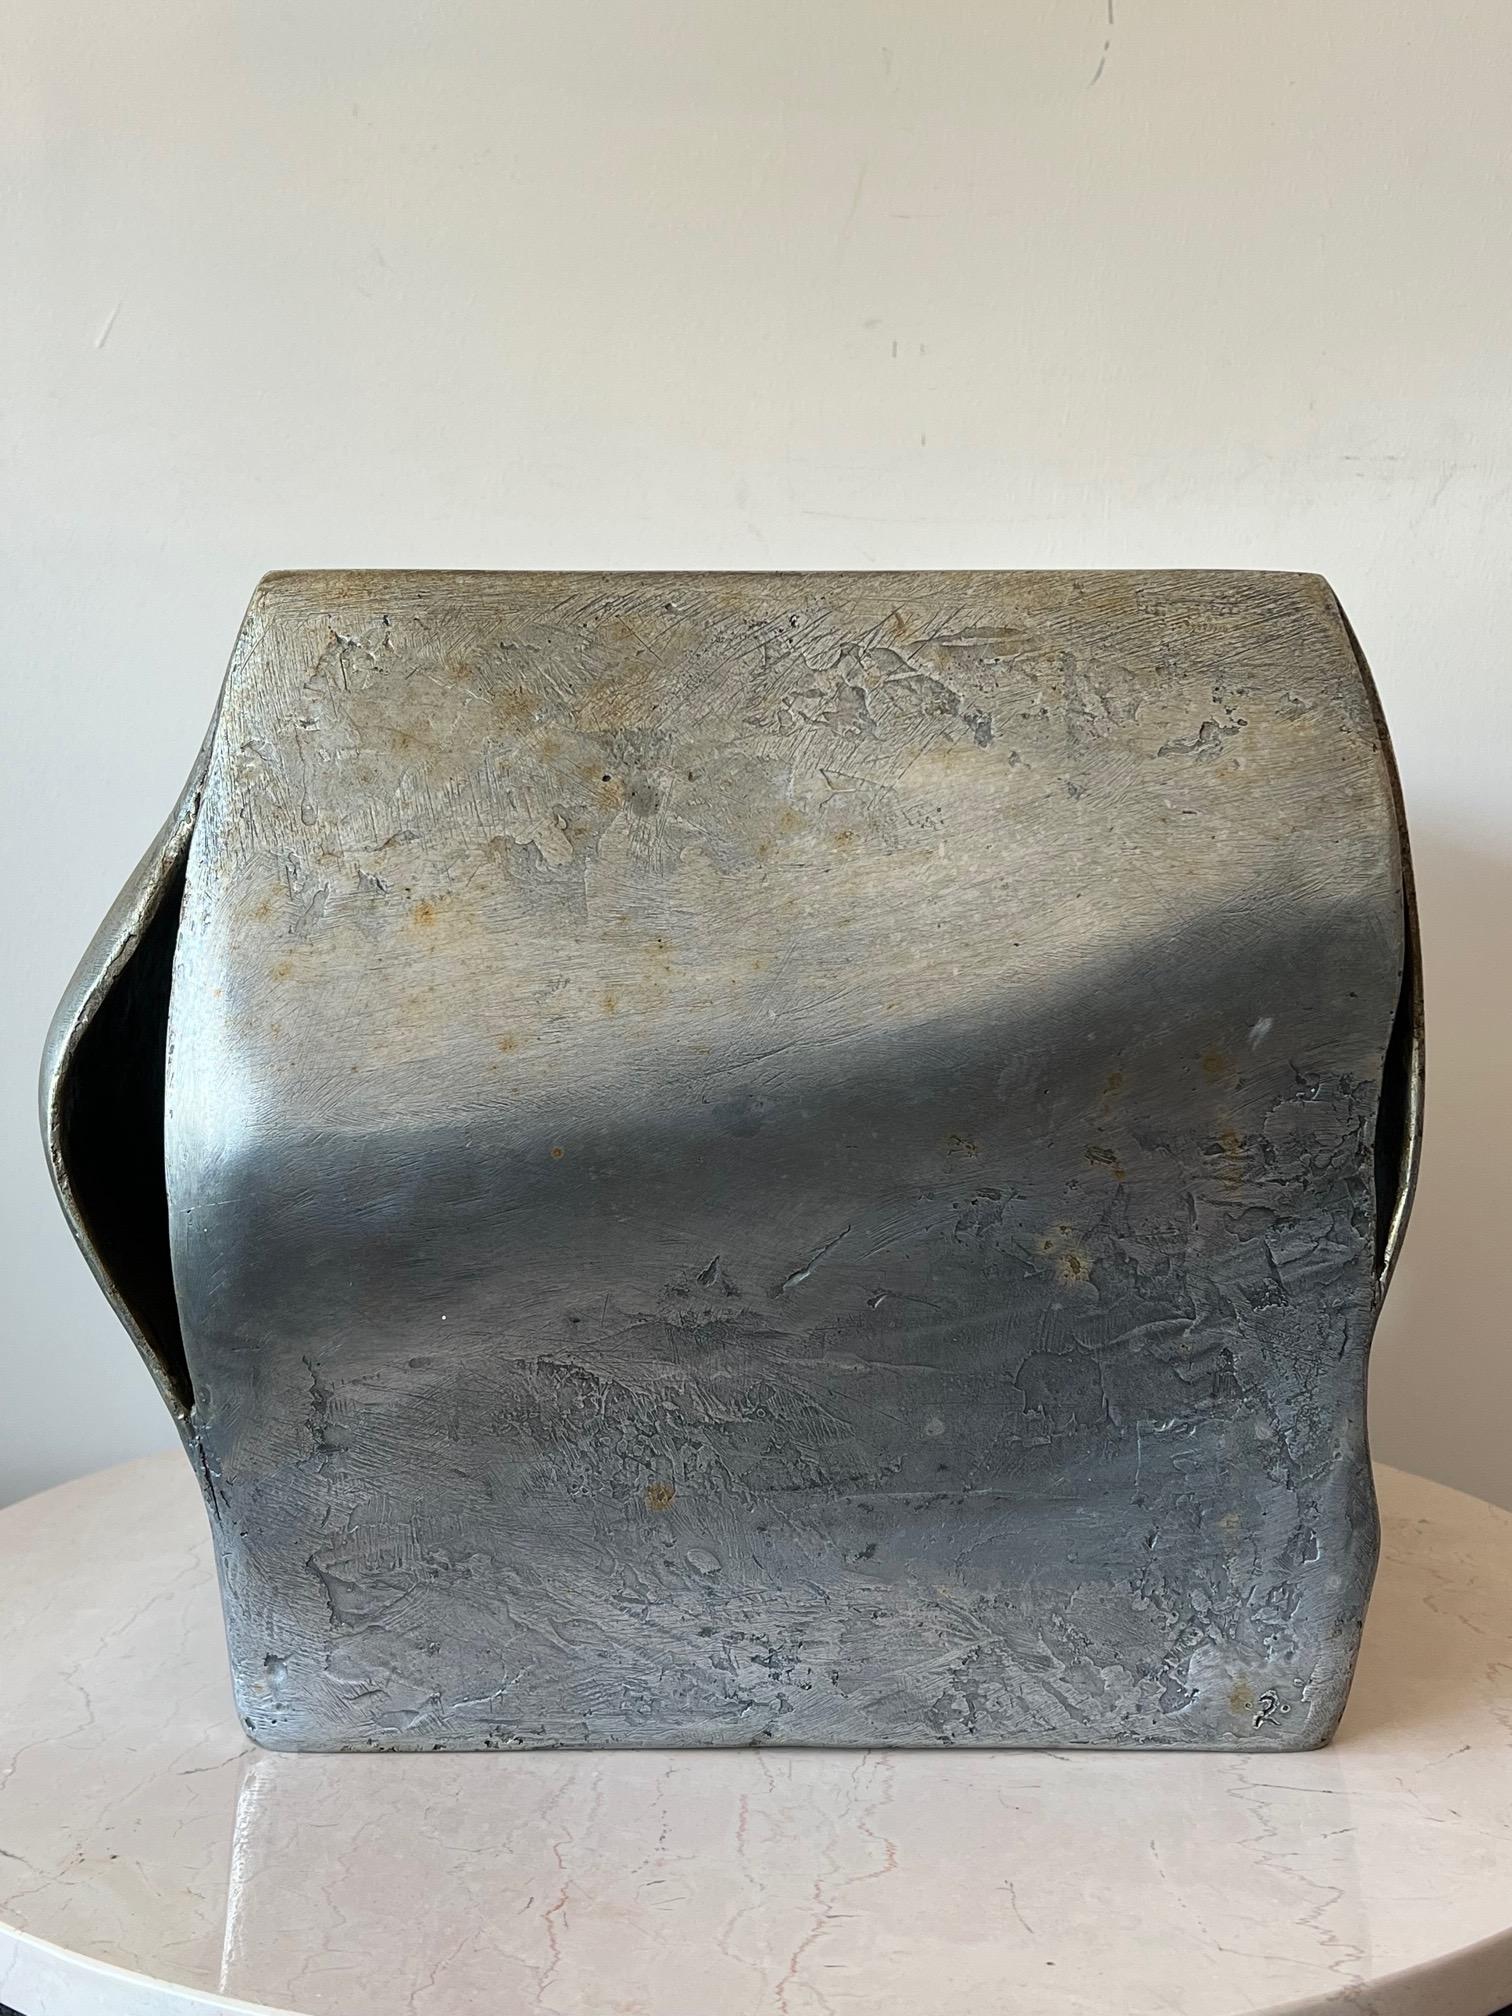 An unusual cast aluminum sculpture by Anne Van Kleeck (1922-1998). A bulging cube, patinated and polished top, that can be a pedestal or side table, unsigned, numbered 2. From the artist's estate. A note about the artist: Anne Van Kleeck was